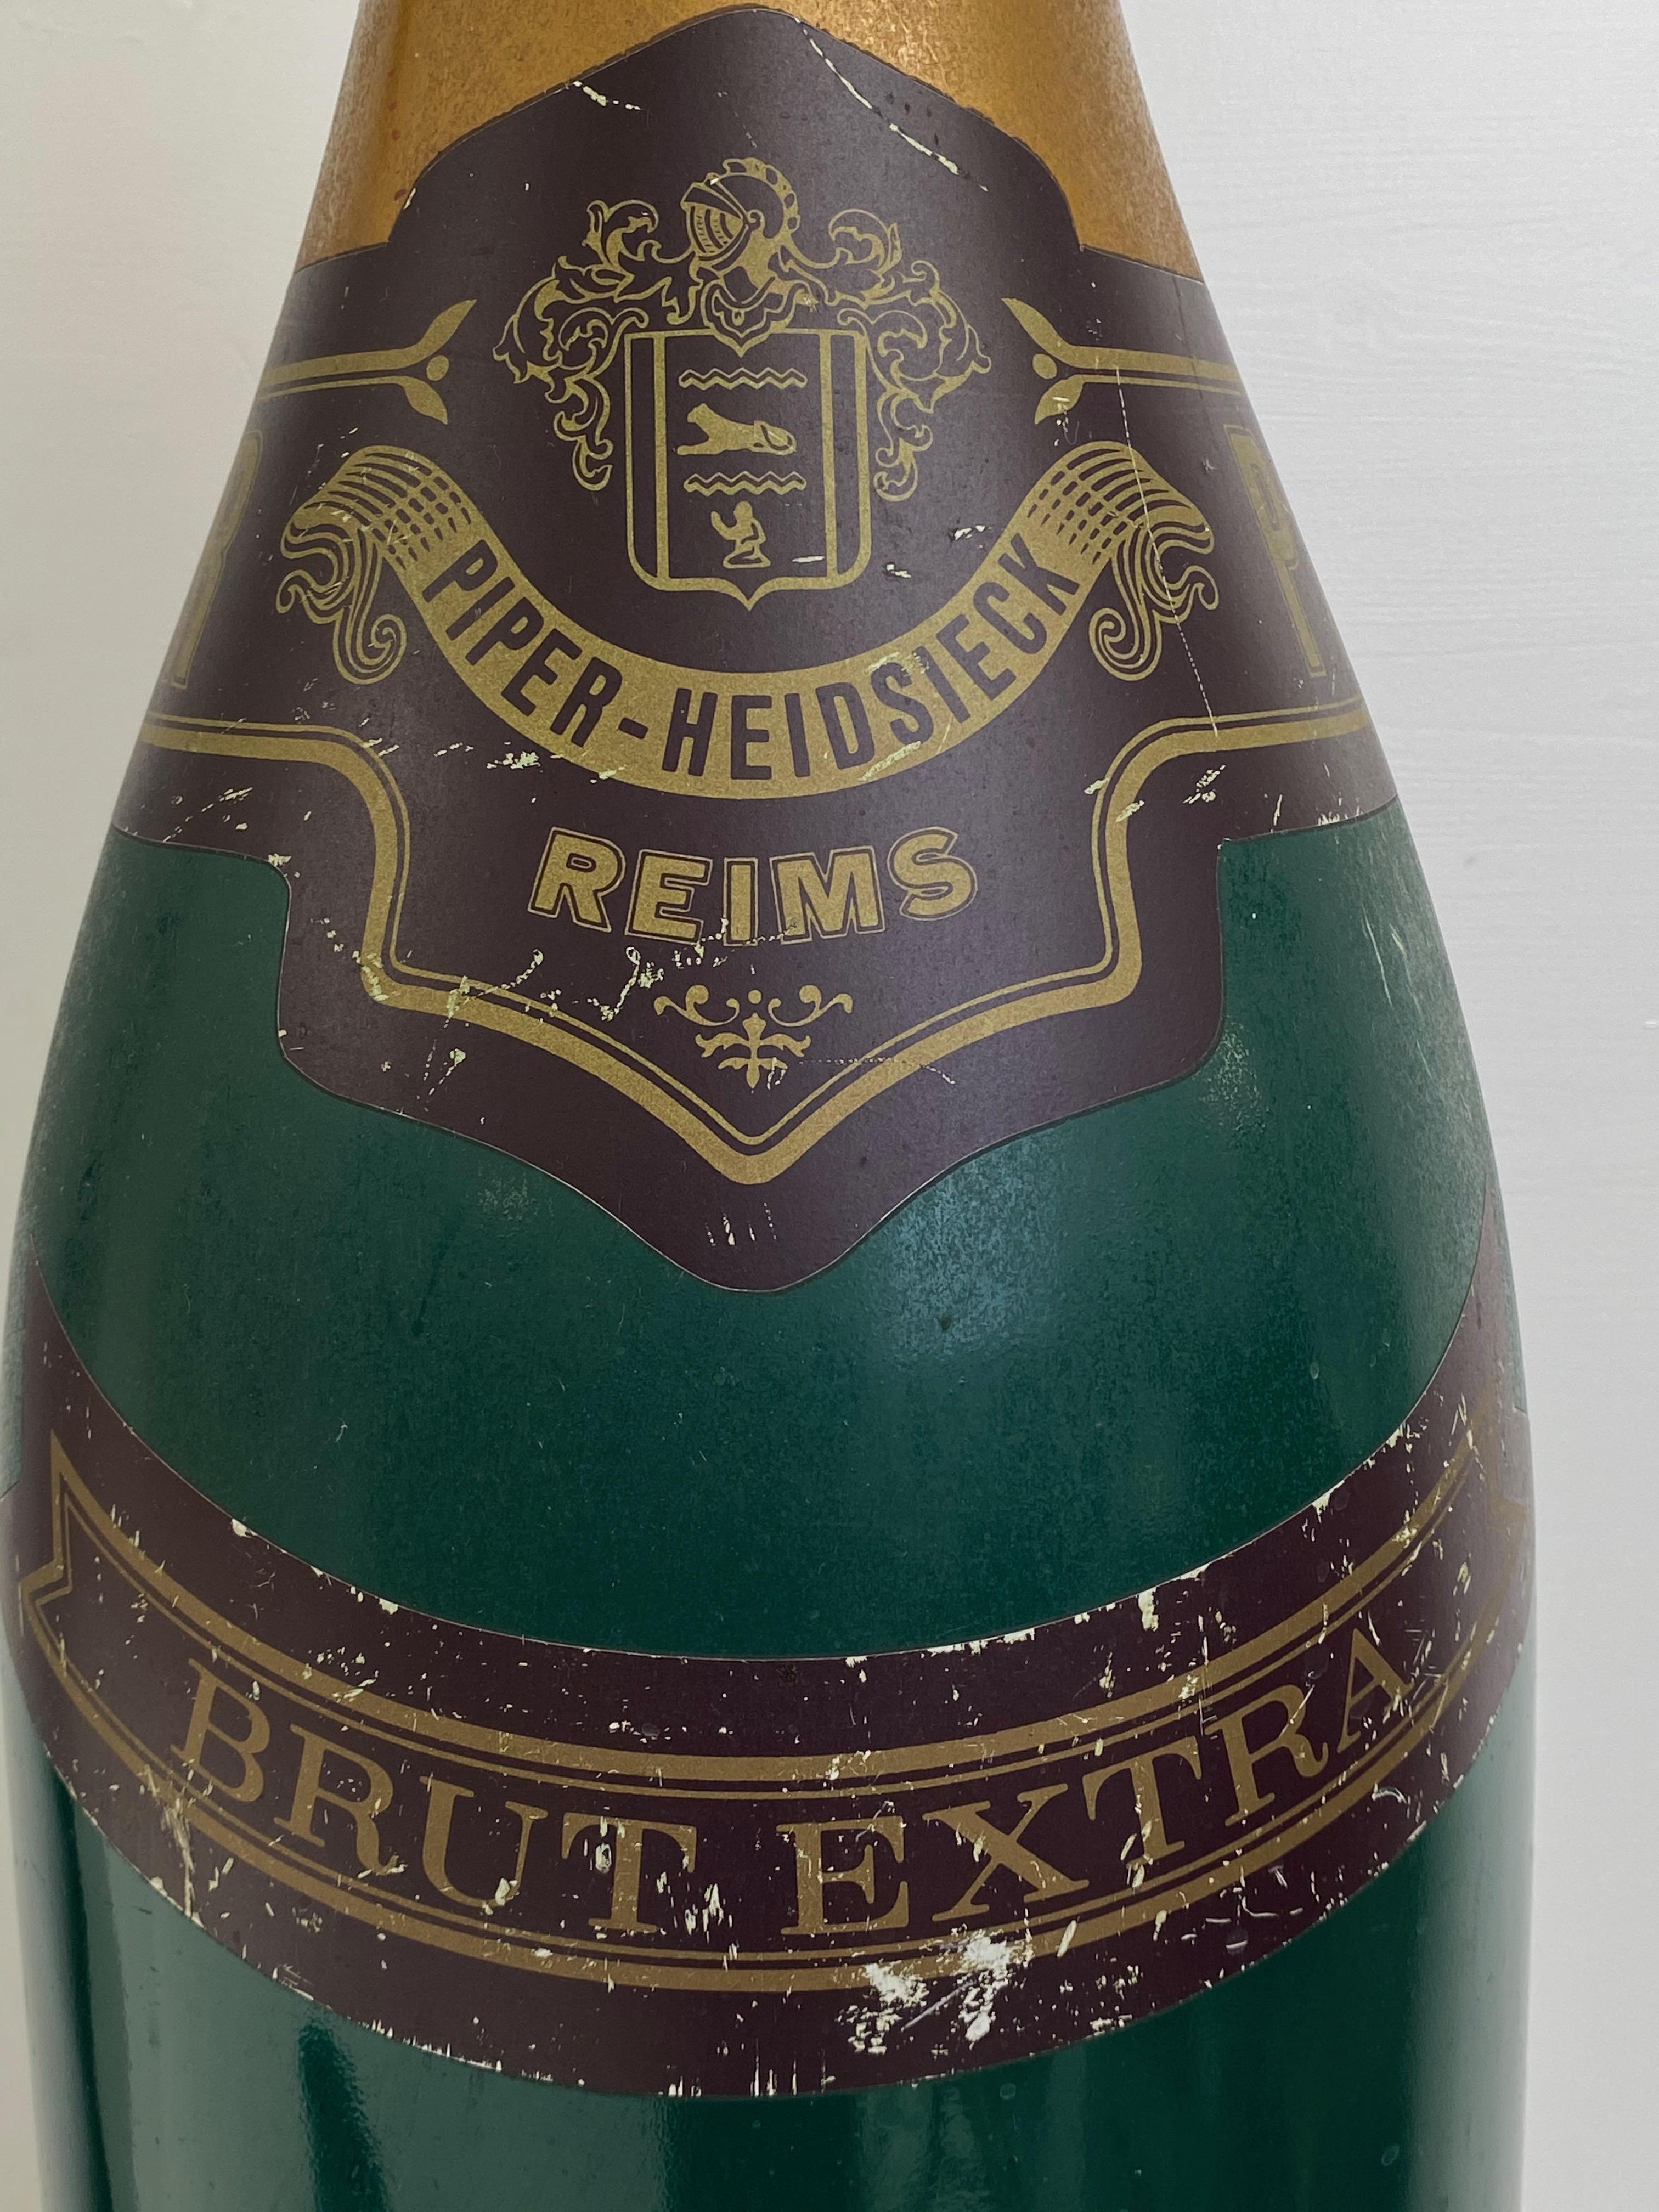 Stunnig display of bottle of Piper Heidsieck champagne,
Great piece of decoration.